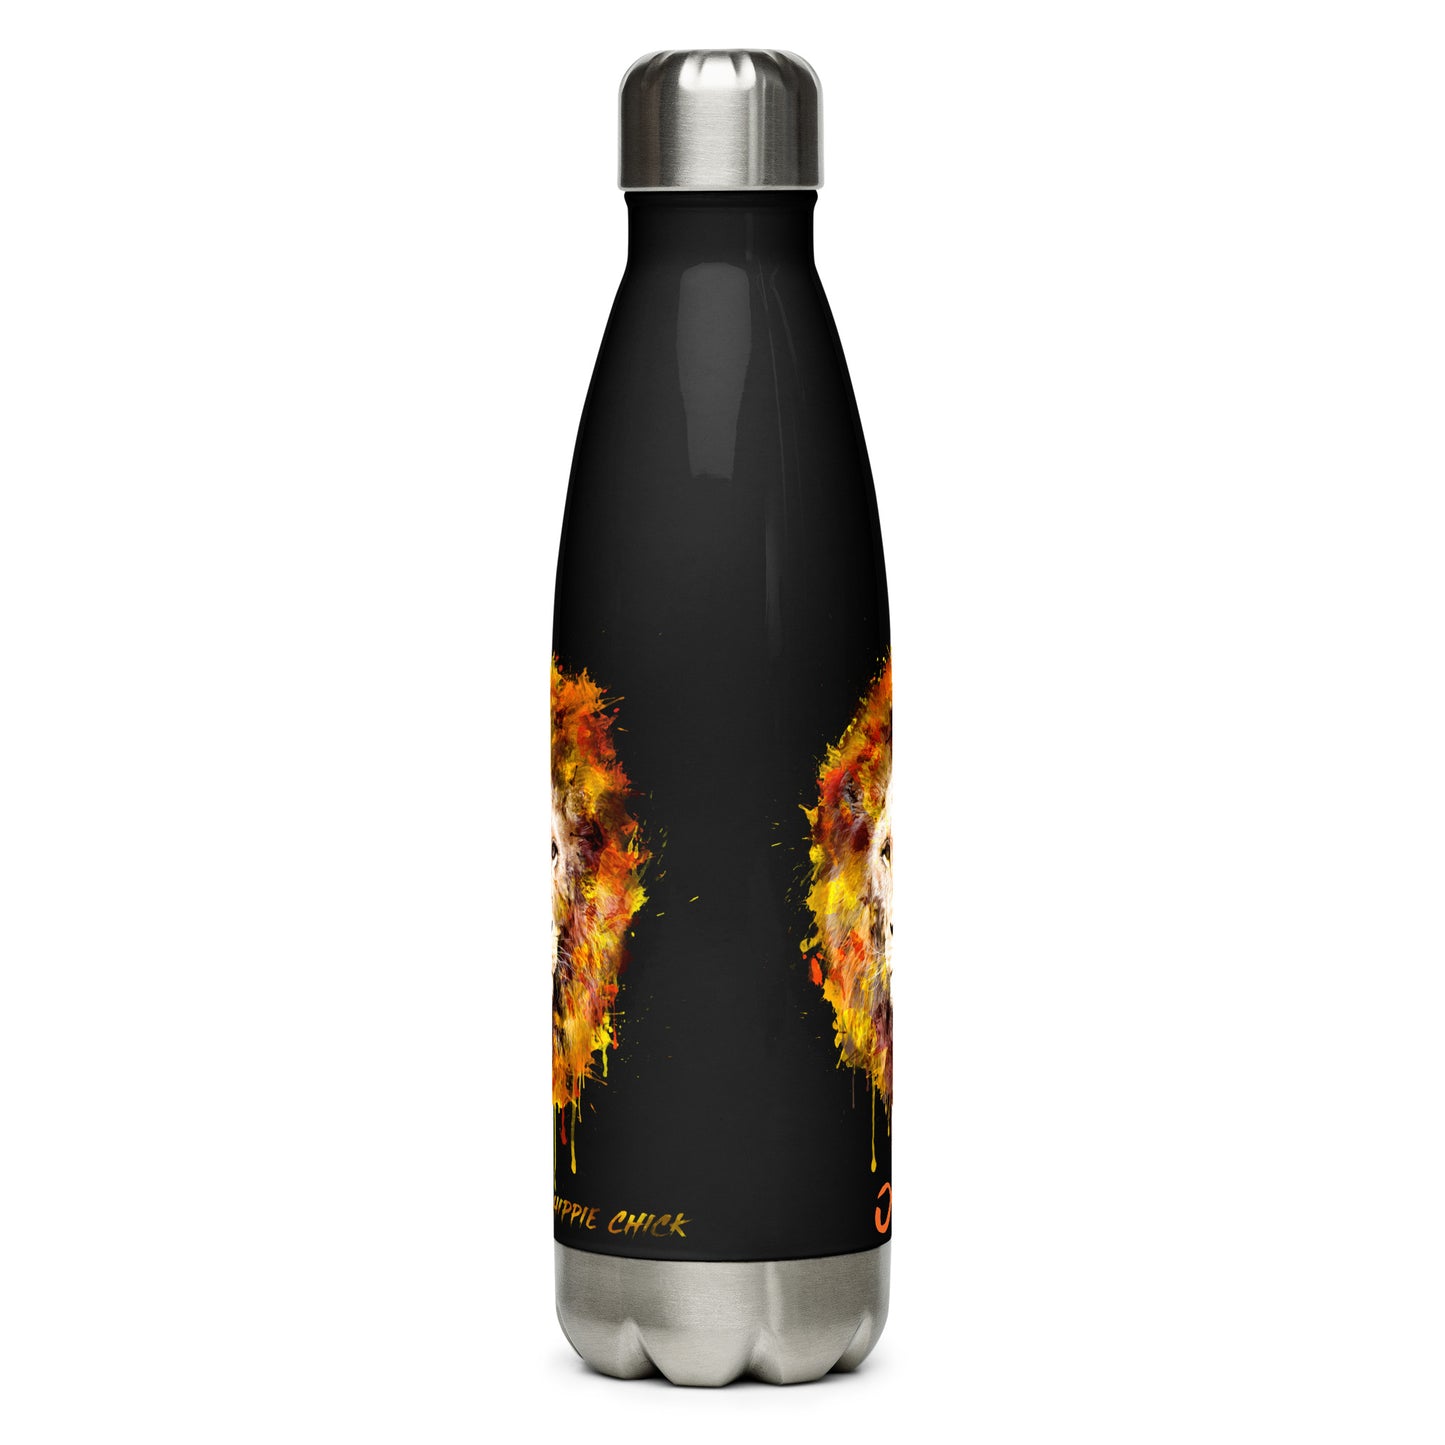 OG Hippie Chick Lions Stainless Steel Water Bottle